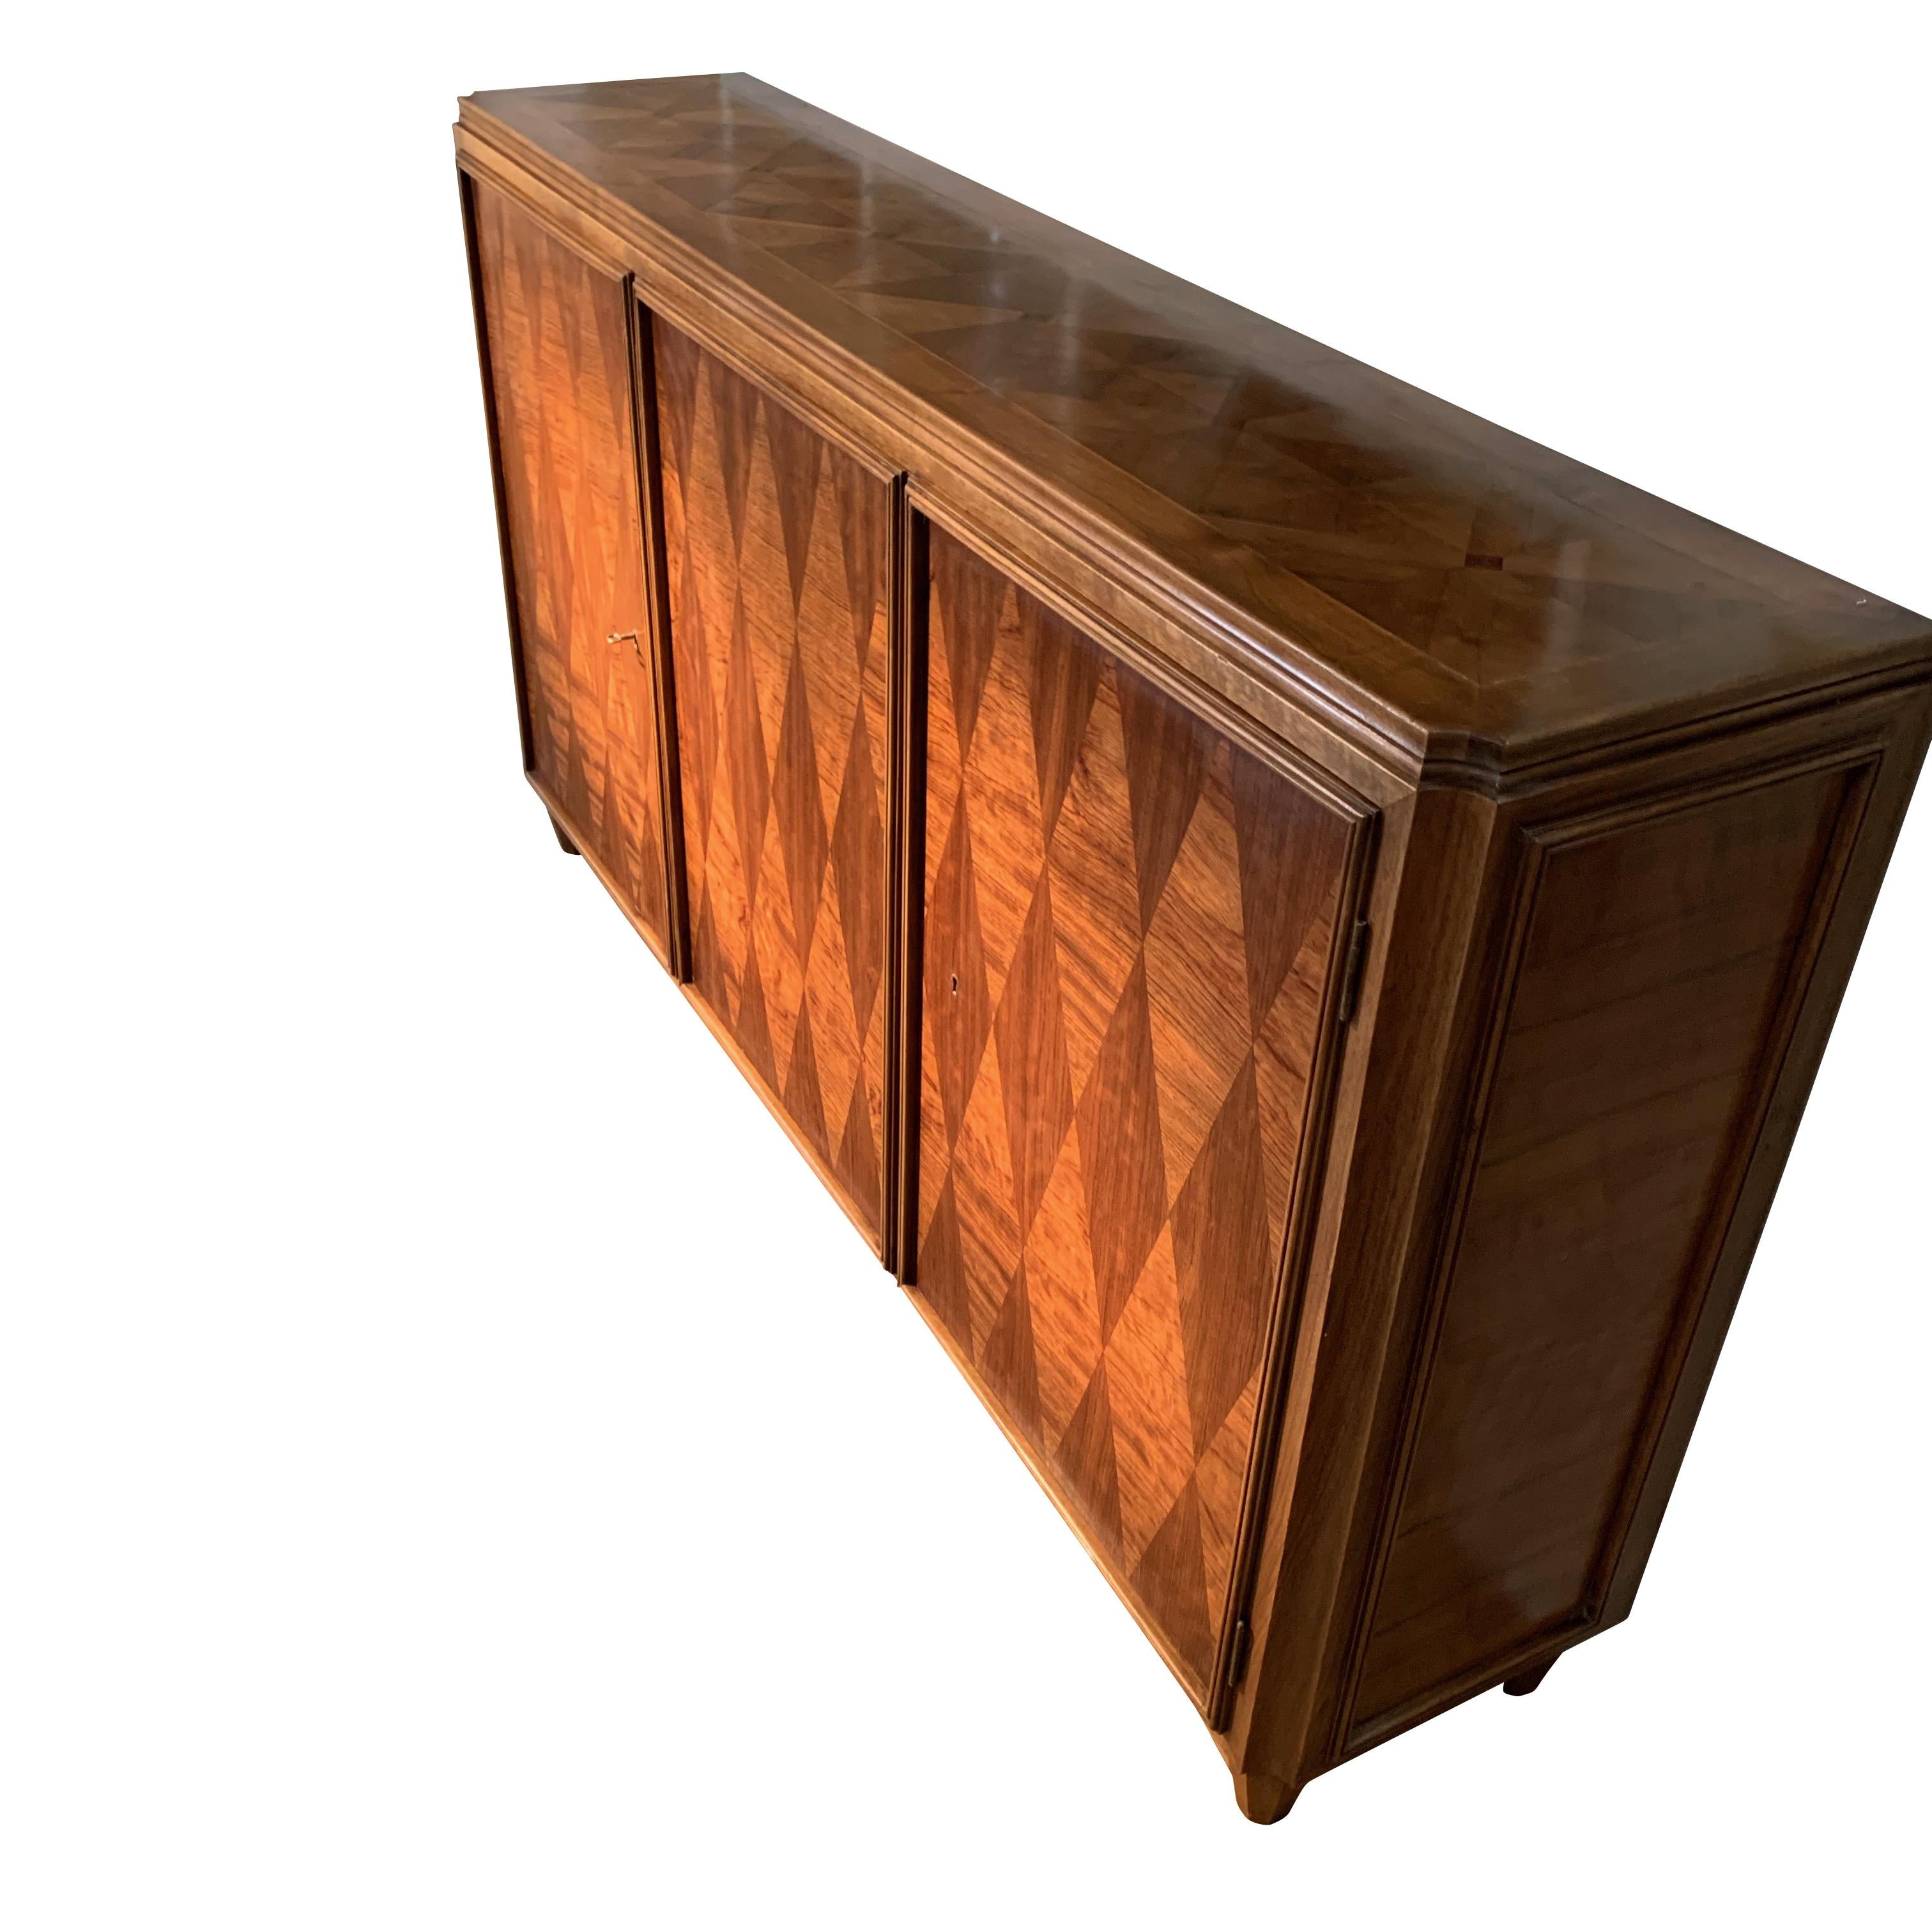 1930s Italian walnut wood credenza in the style of designer Osvaldo Borsani.
Decorative parquet designed front with inlaid pattern top.
The credenza has three doors and inner shelves.

 